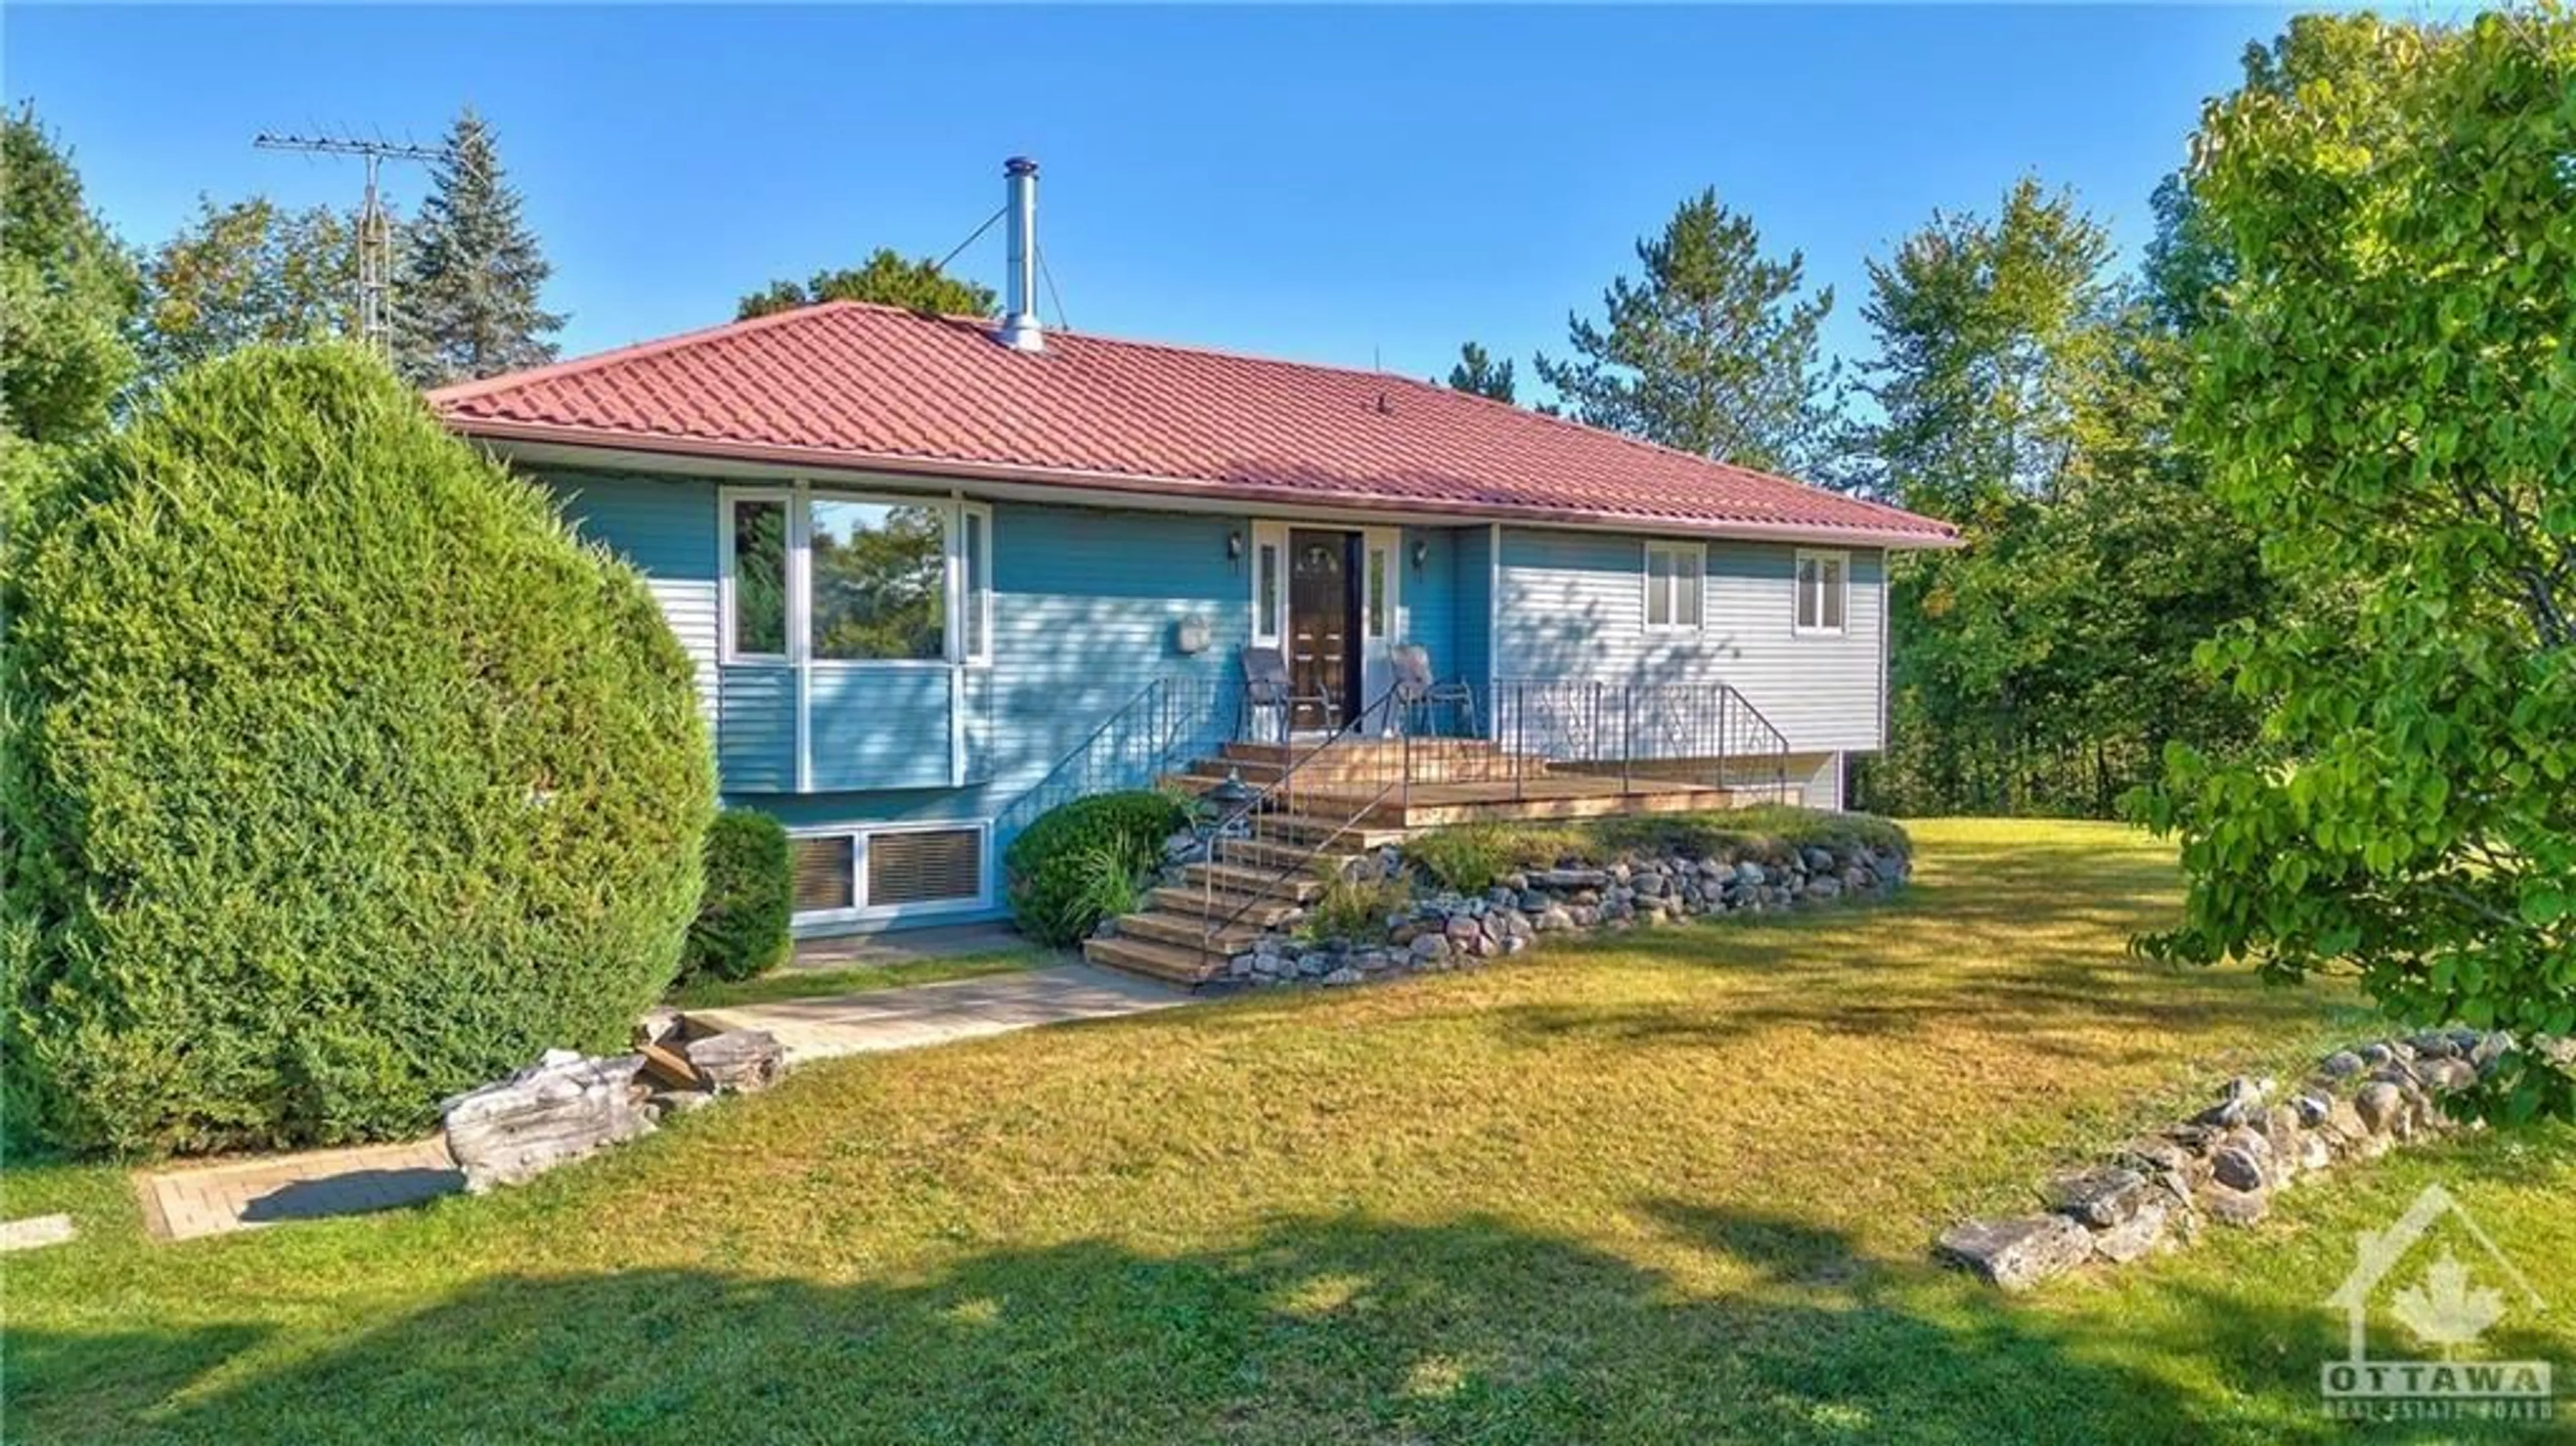 Outside view for 644 ZEALAND Rd, Maberly Ontario K0H 2B0